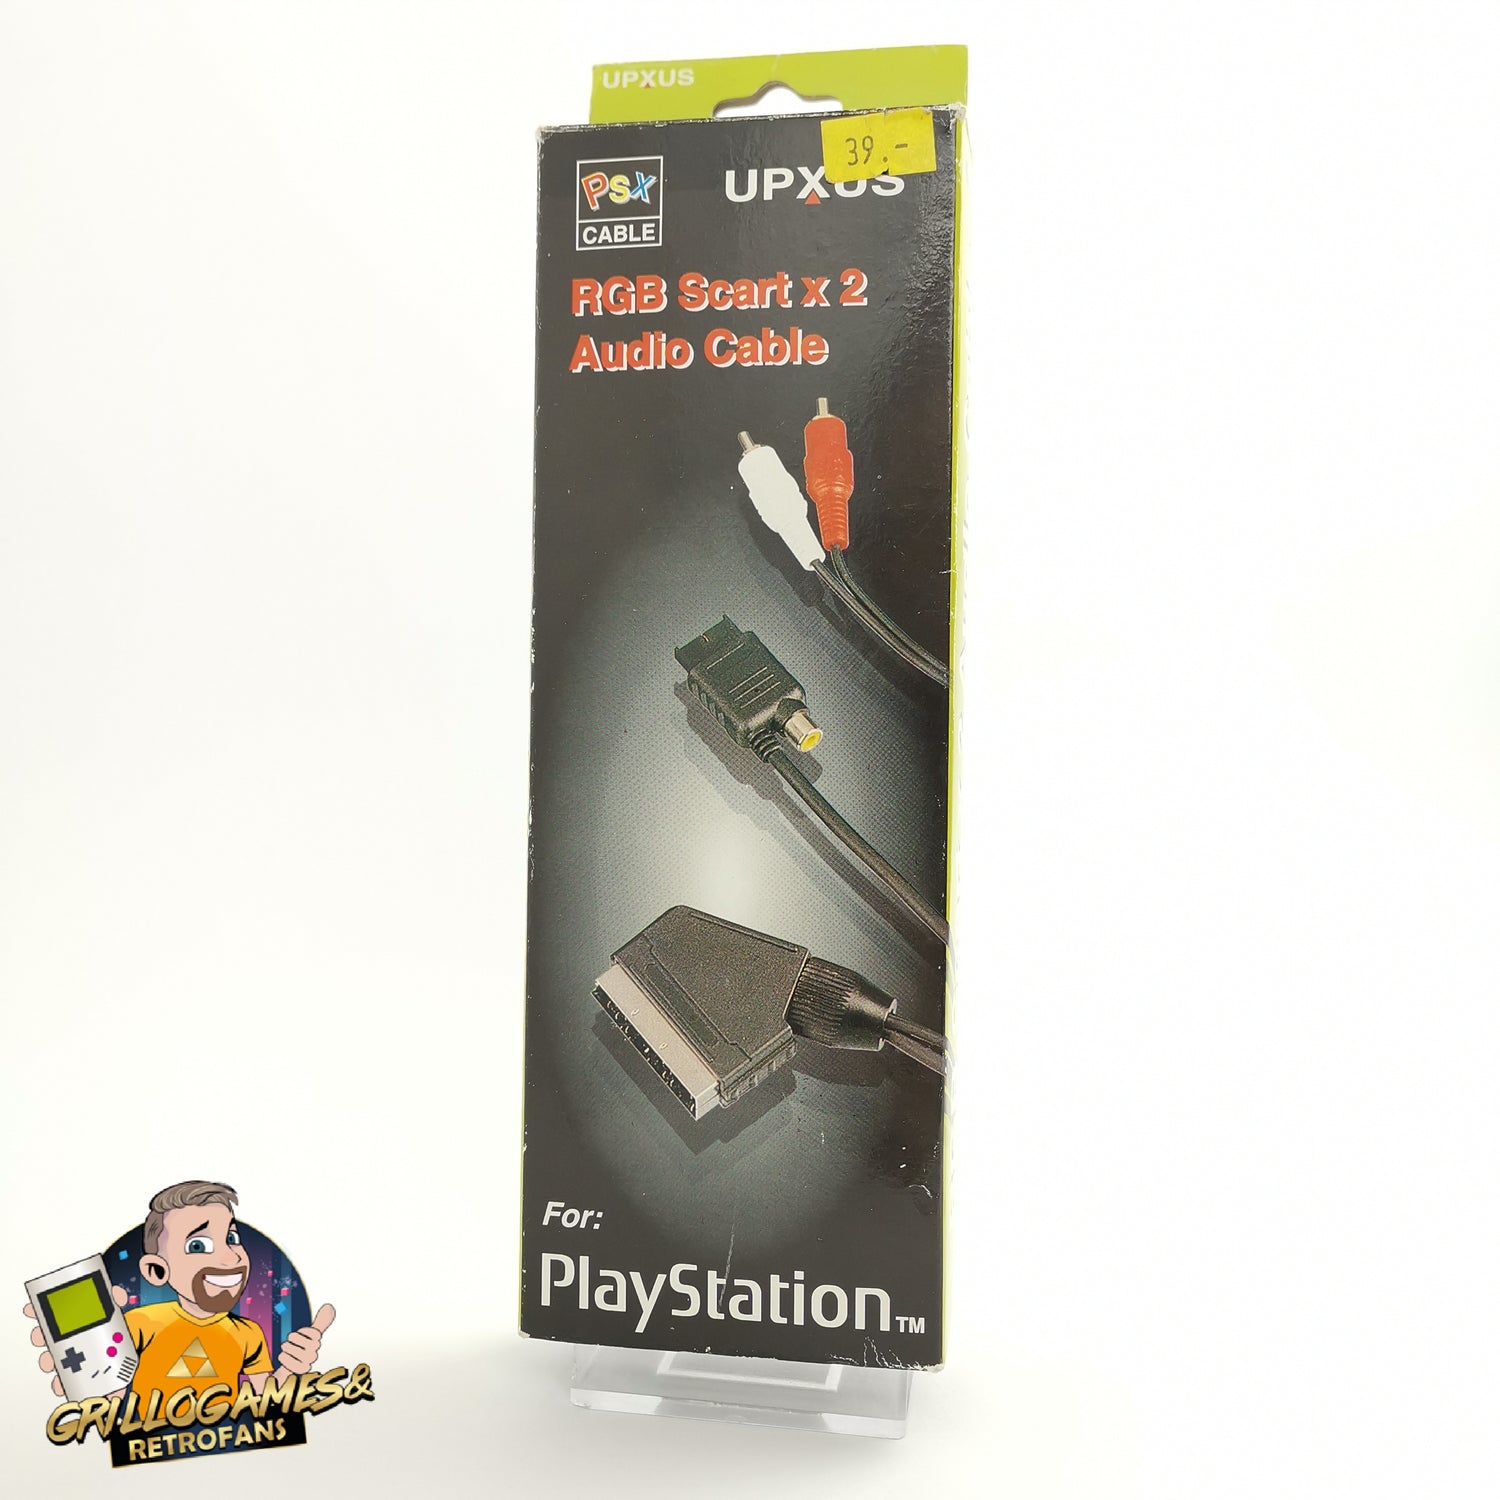 Sony Playstation 1 Accessories: RGB Scart x 2 Audio Cable Cable | PS1 PSX - original packaging